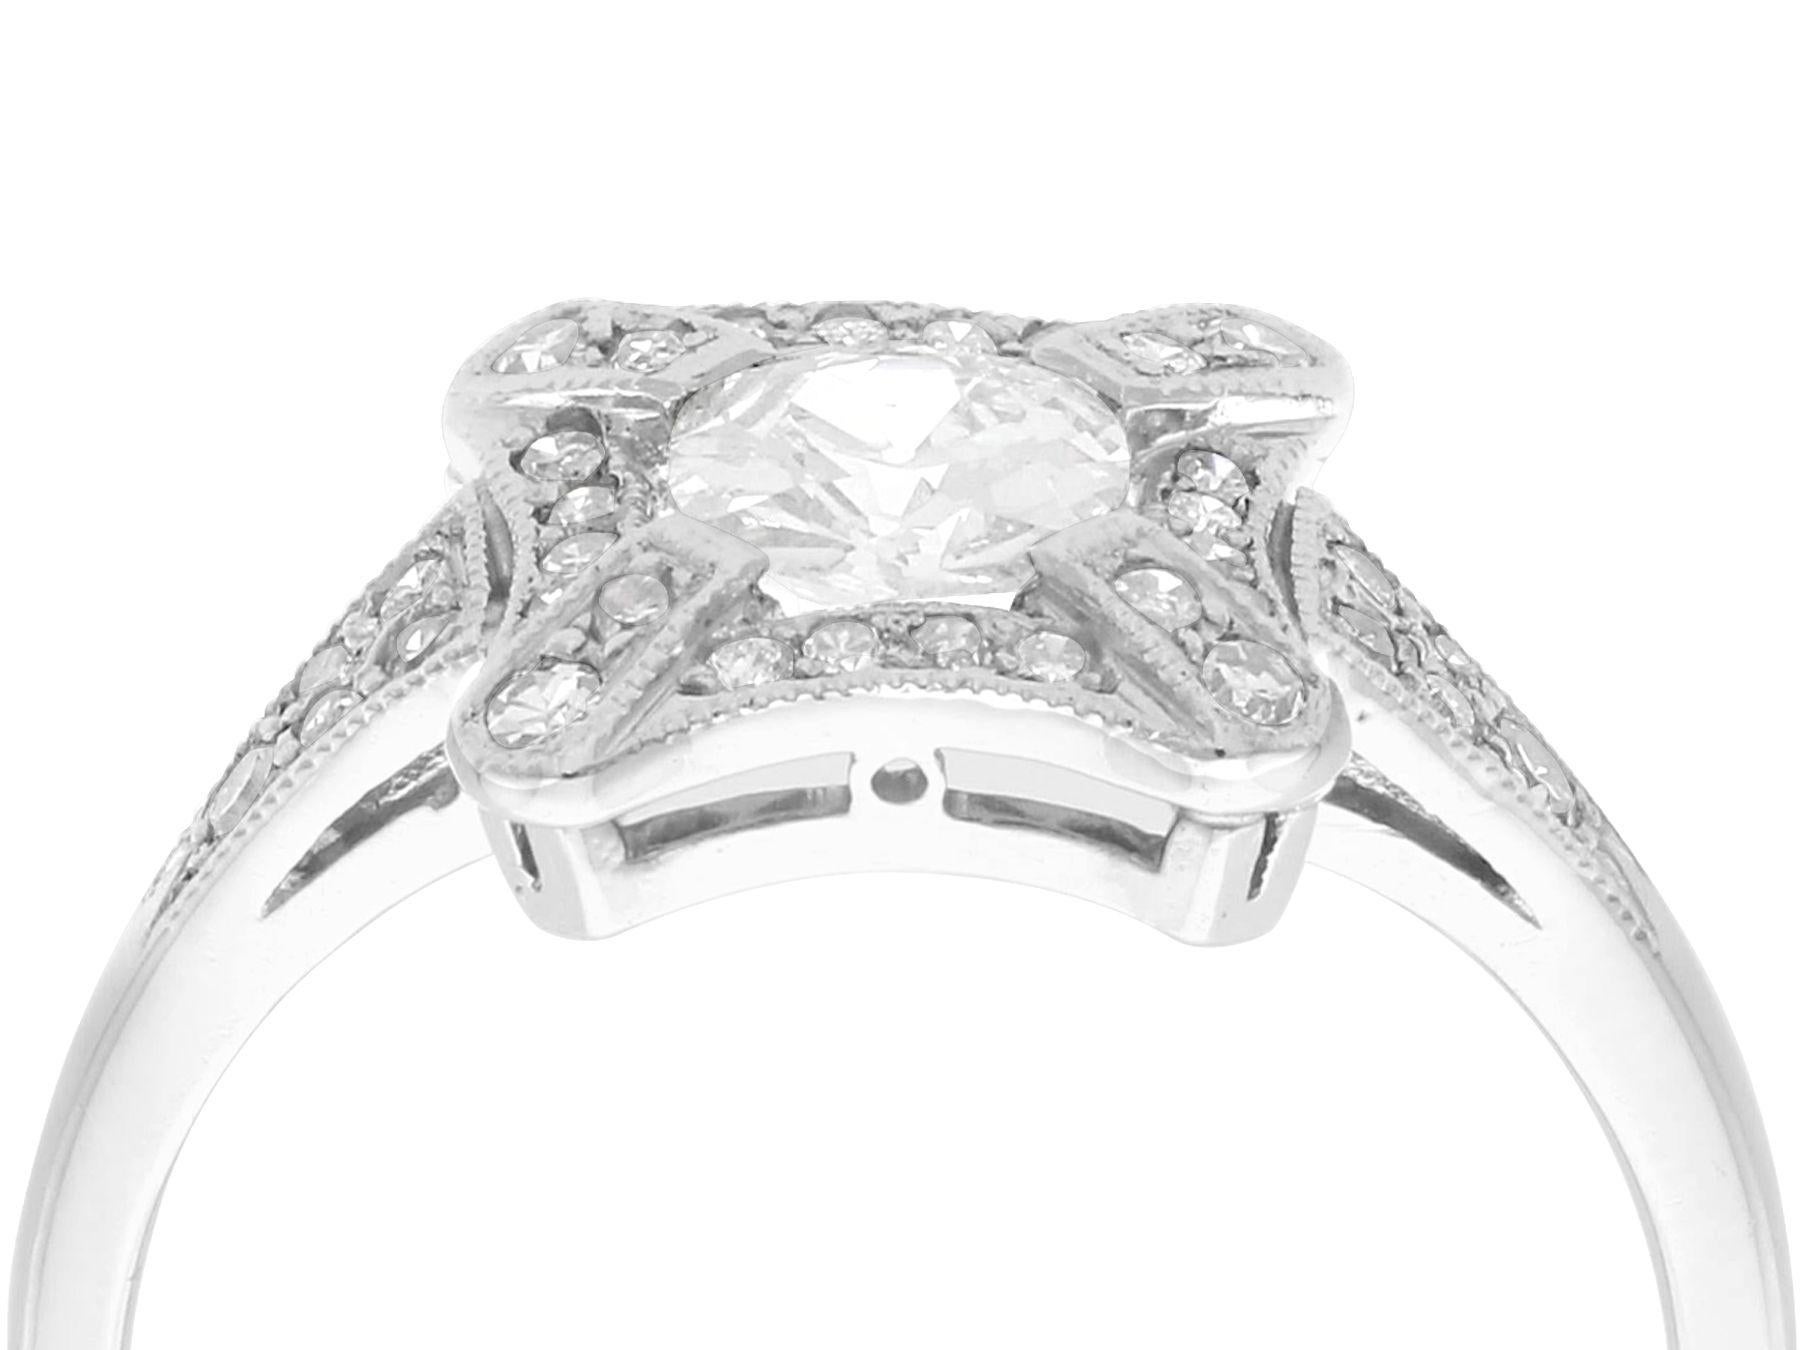 A stunning, fine and impressive antique and contemporary 1.06 carat diamond and platinum cluster ring; part of our diverse antique jewelry and estate jewelry collections

This stunning, fine and impressive diamond ring has been crafted in